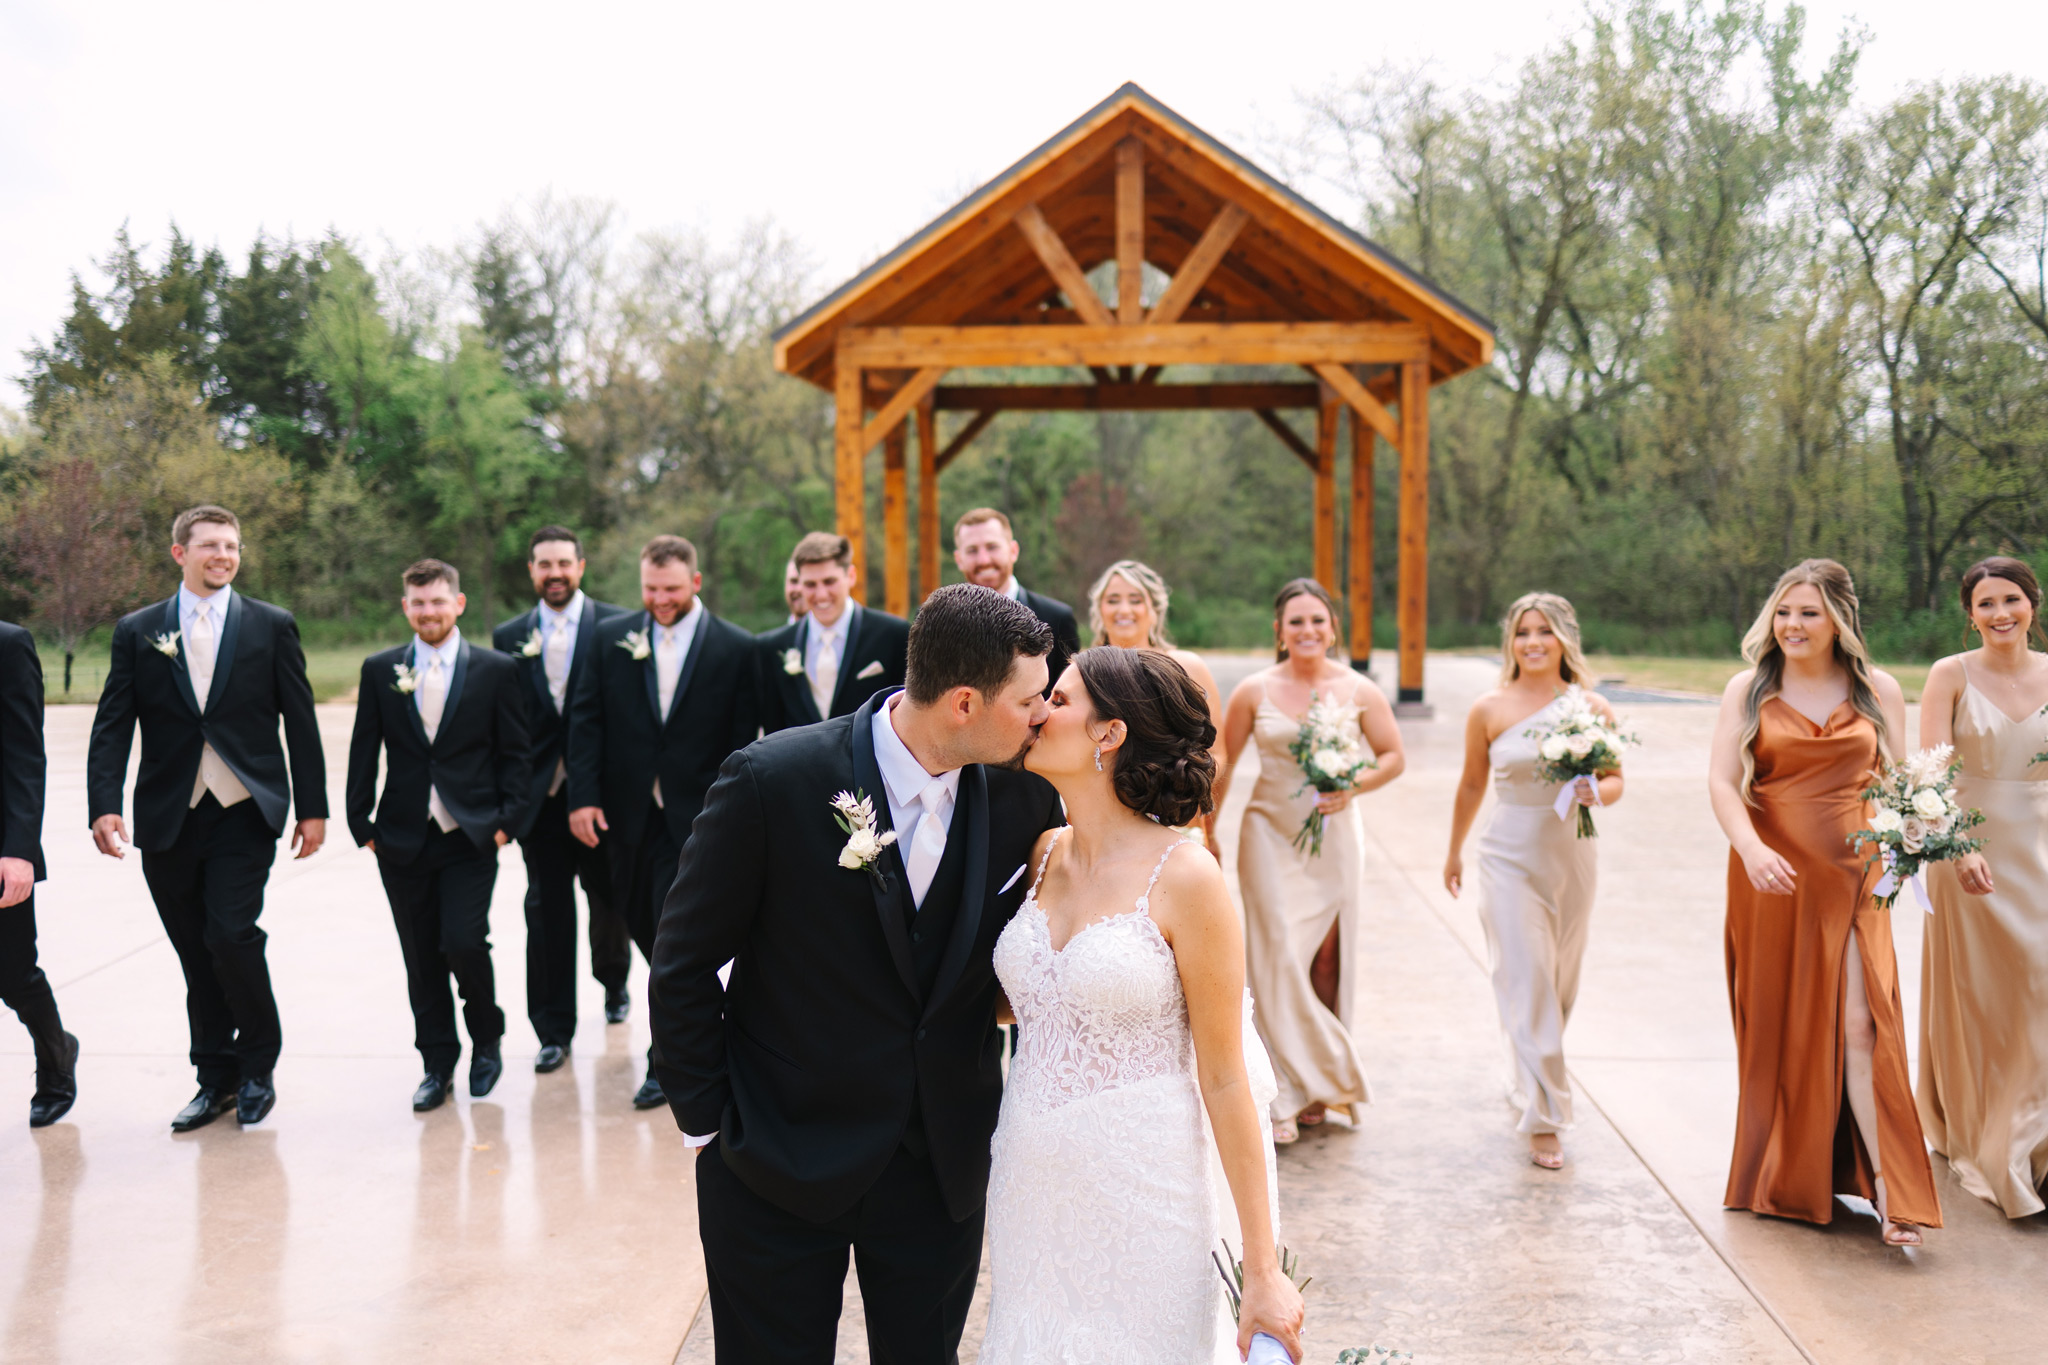 A caucasian bride and groom stop to kiss in front of a wooden pavilion and the wedding party.